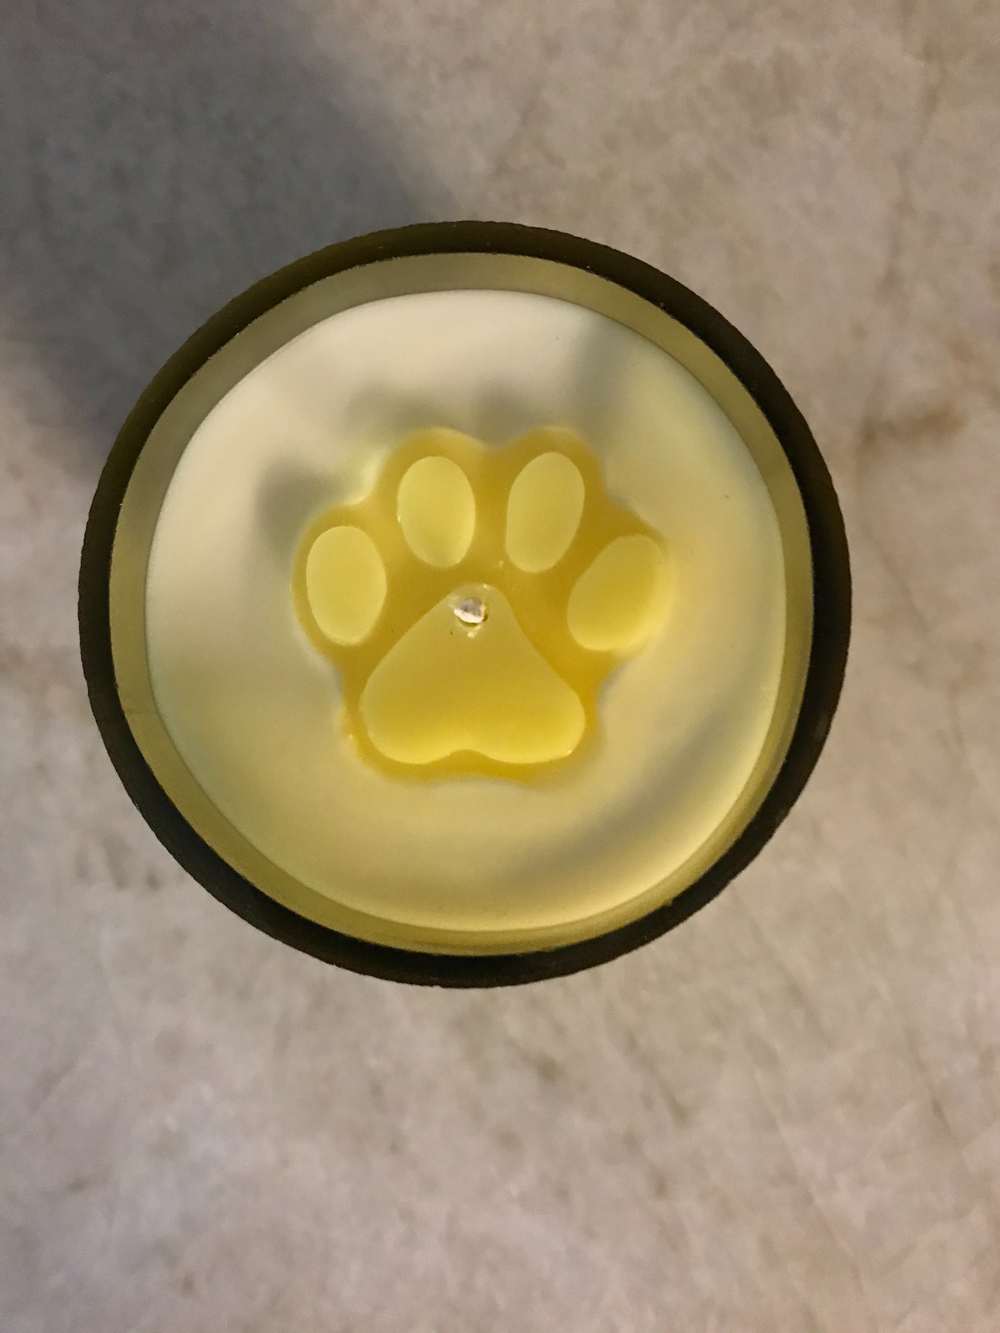 Candle made from a wine bottle.  Profits benefit animal rescue.